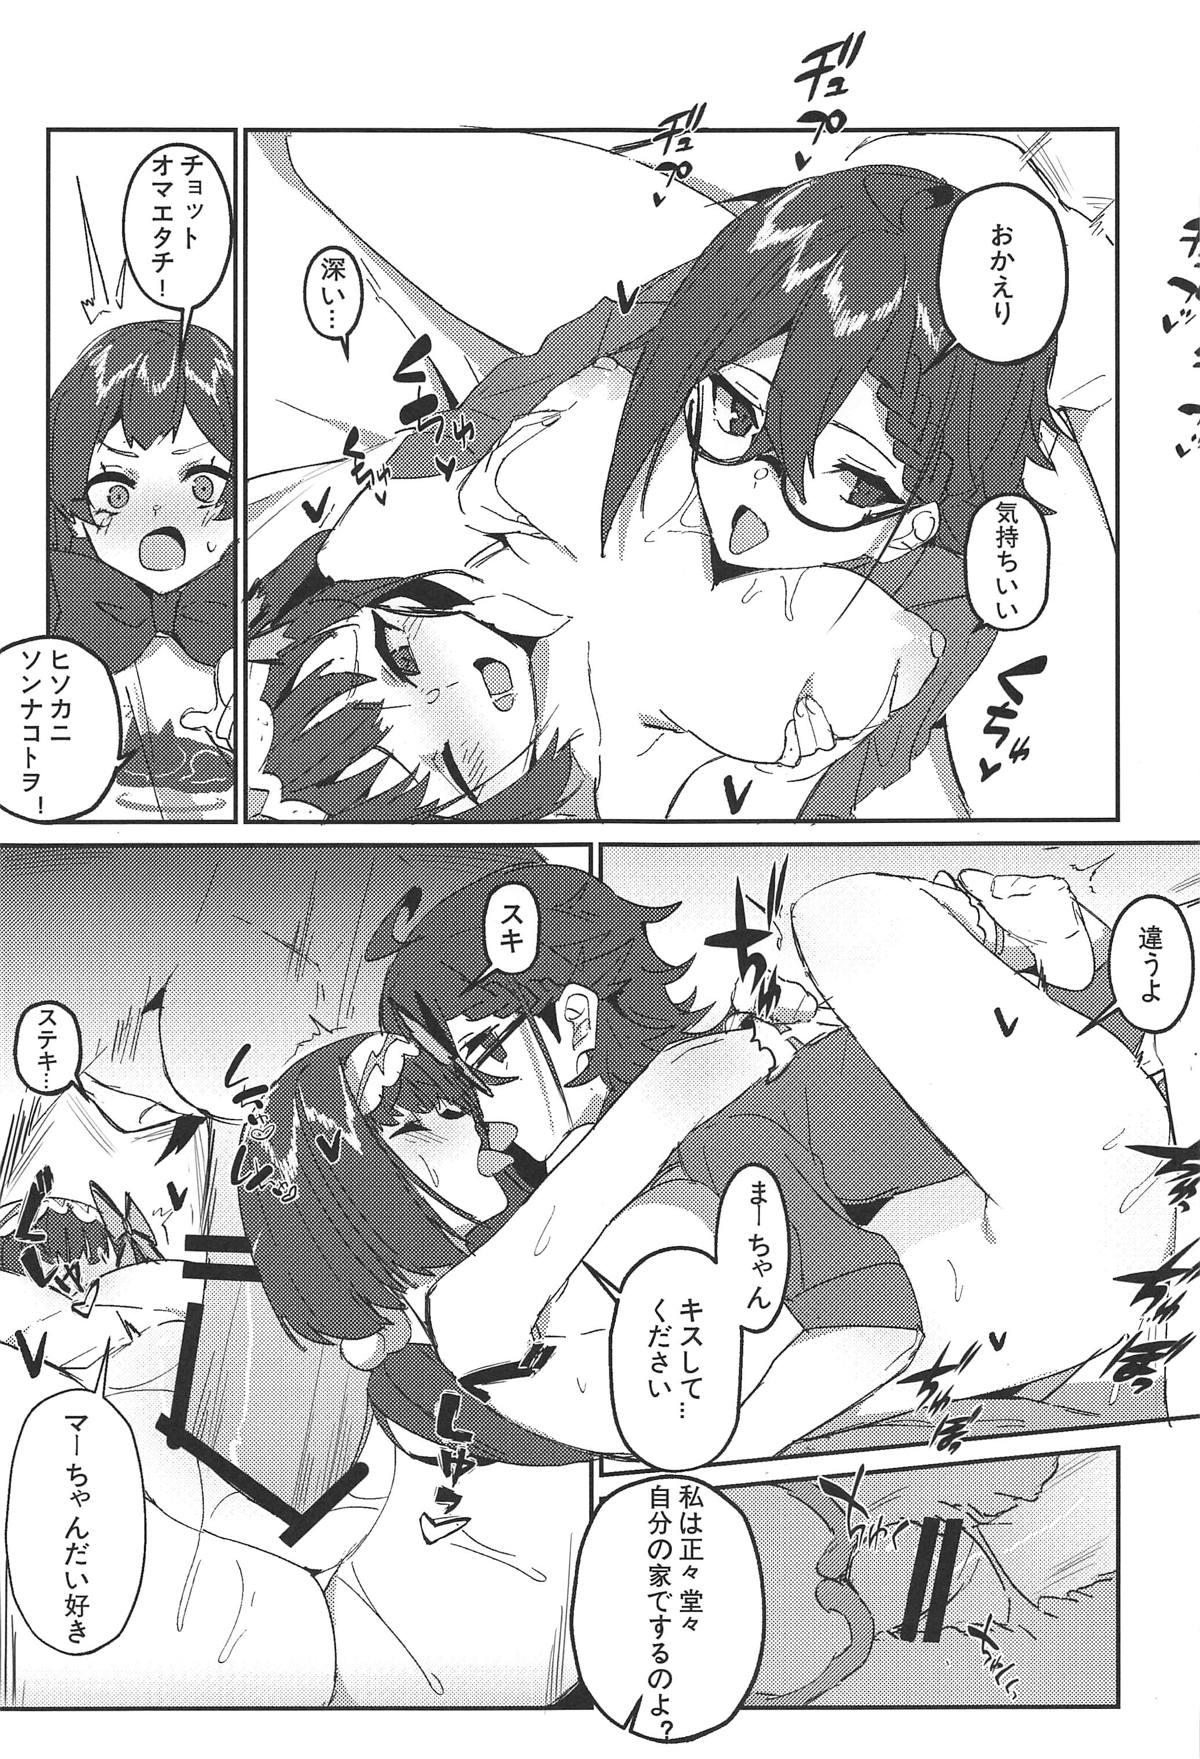 Scene change daily 1 - Kantai collection Fate grand order Teens - Page 10